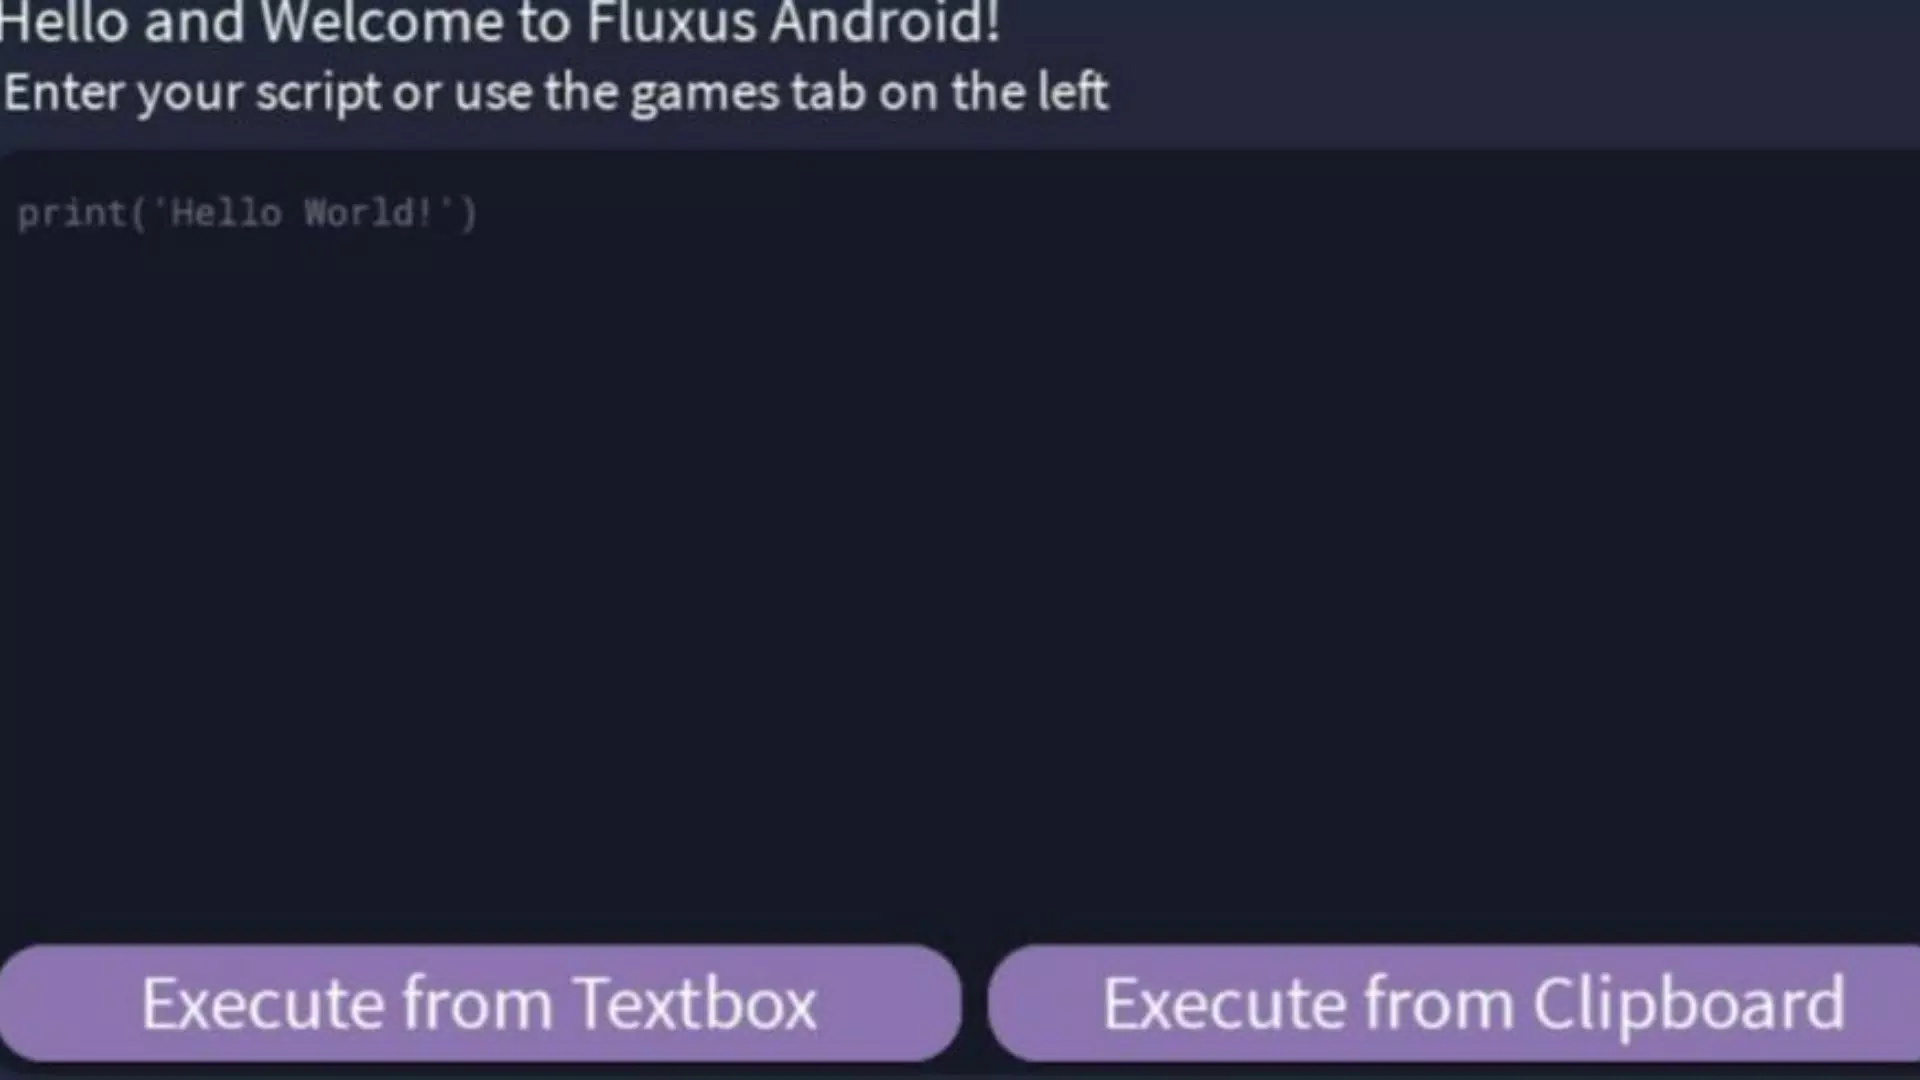 Fluxus Roblox Apk Download Free for Android [Roblox Tool]